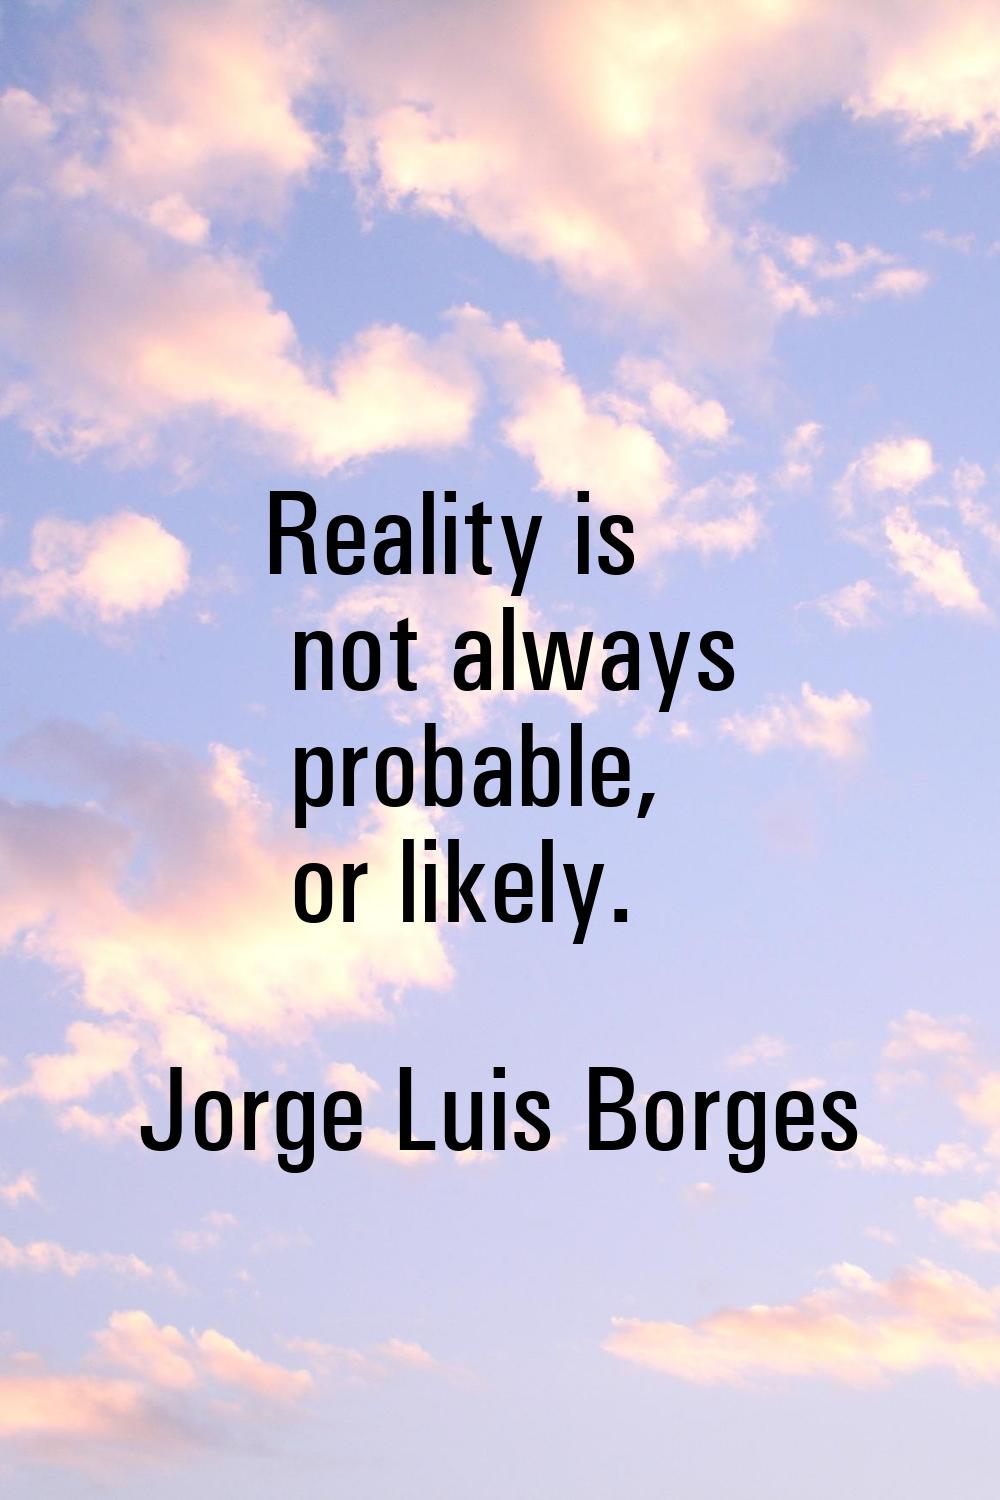 Reality is not always probable, or likely.